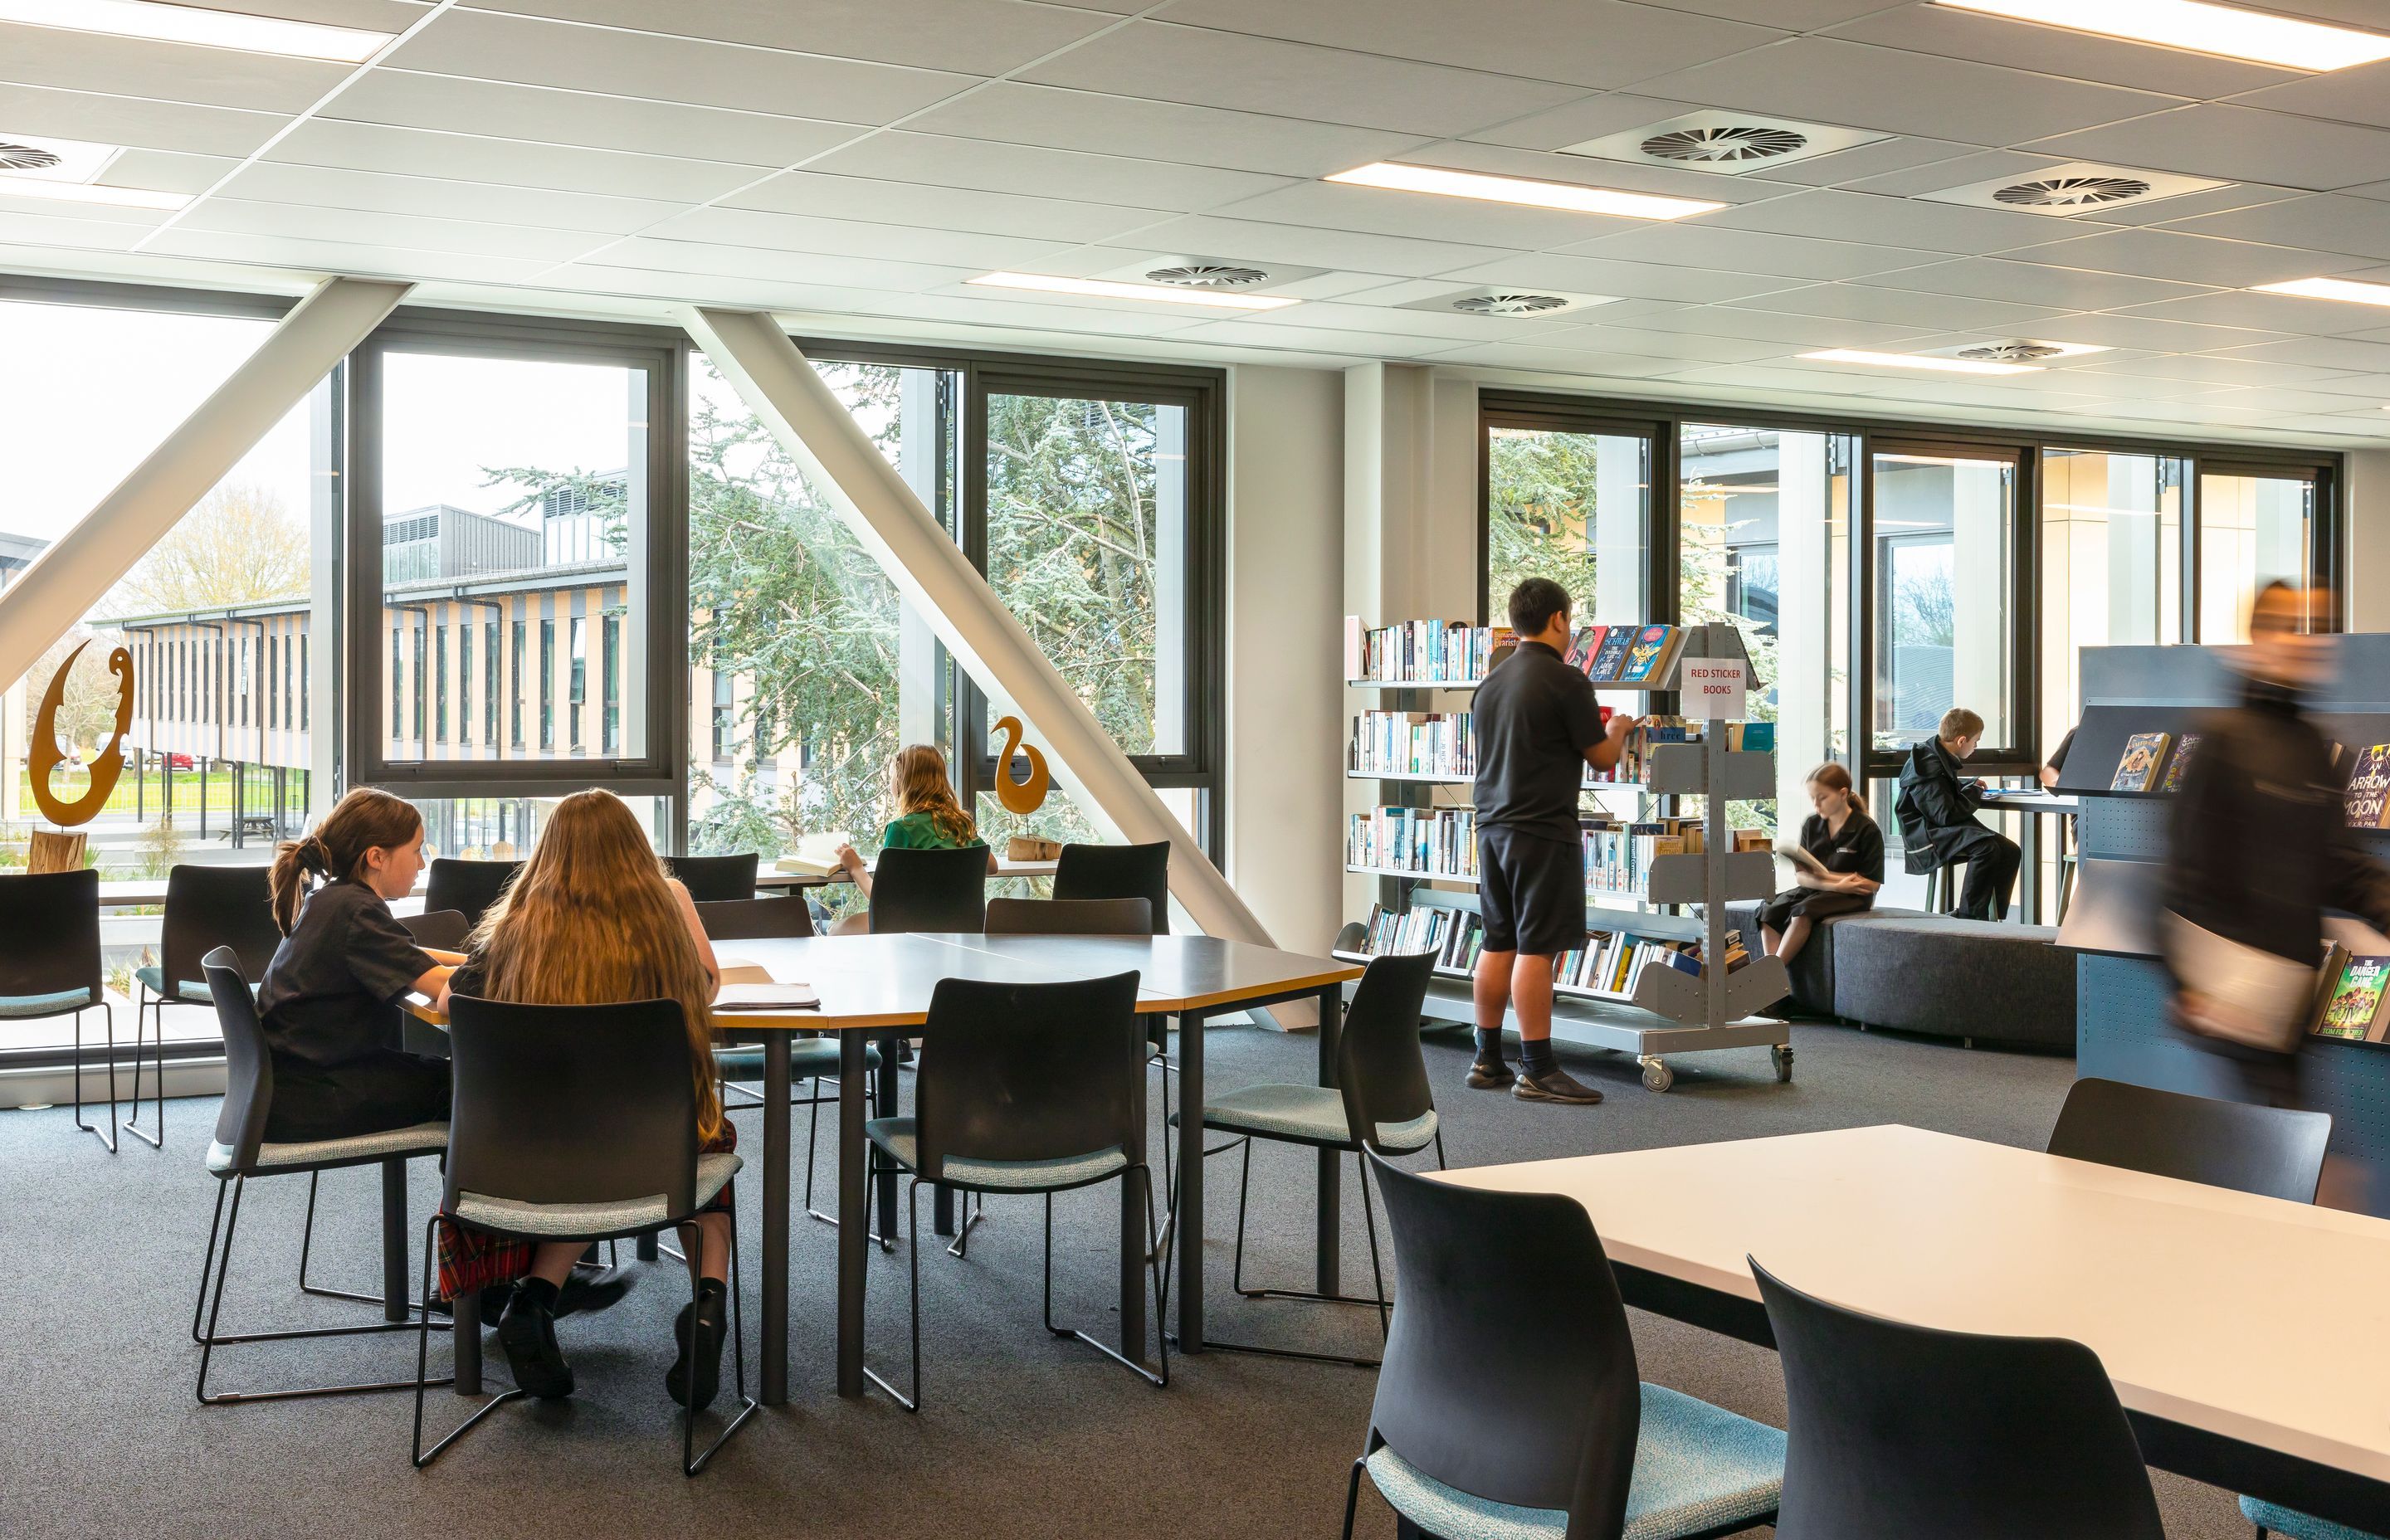 The state-of-the-art library facility is a welcome update for students.